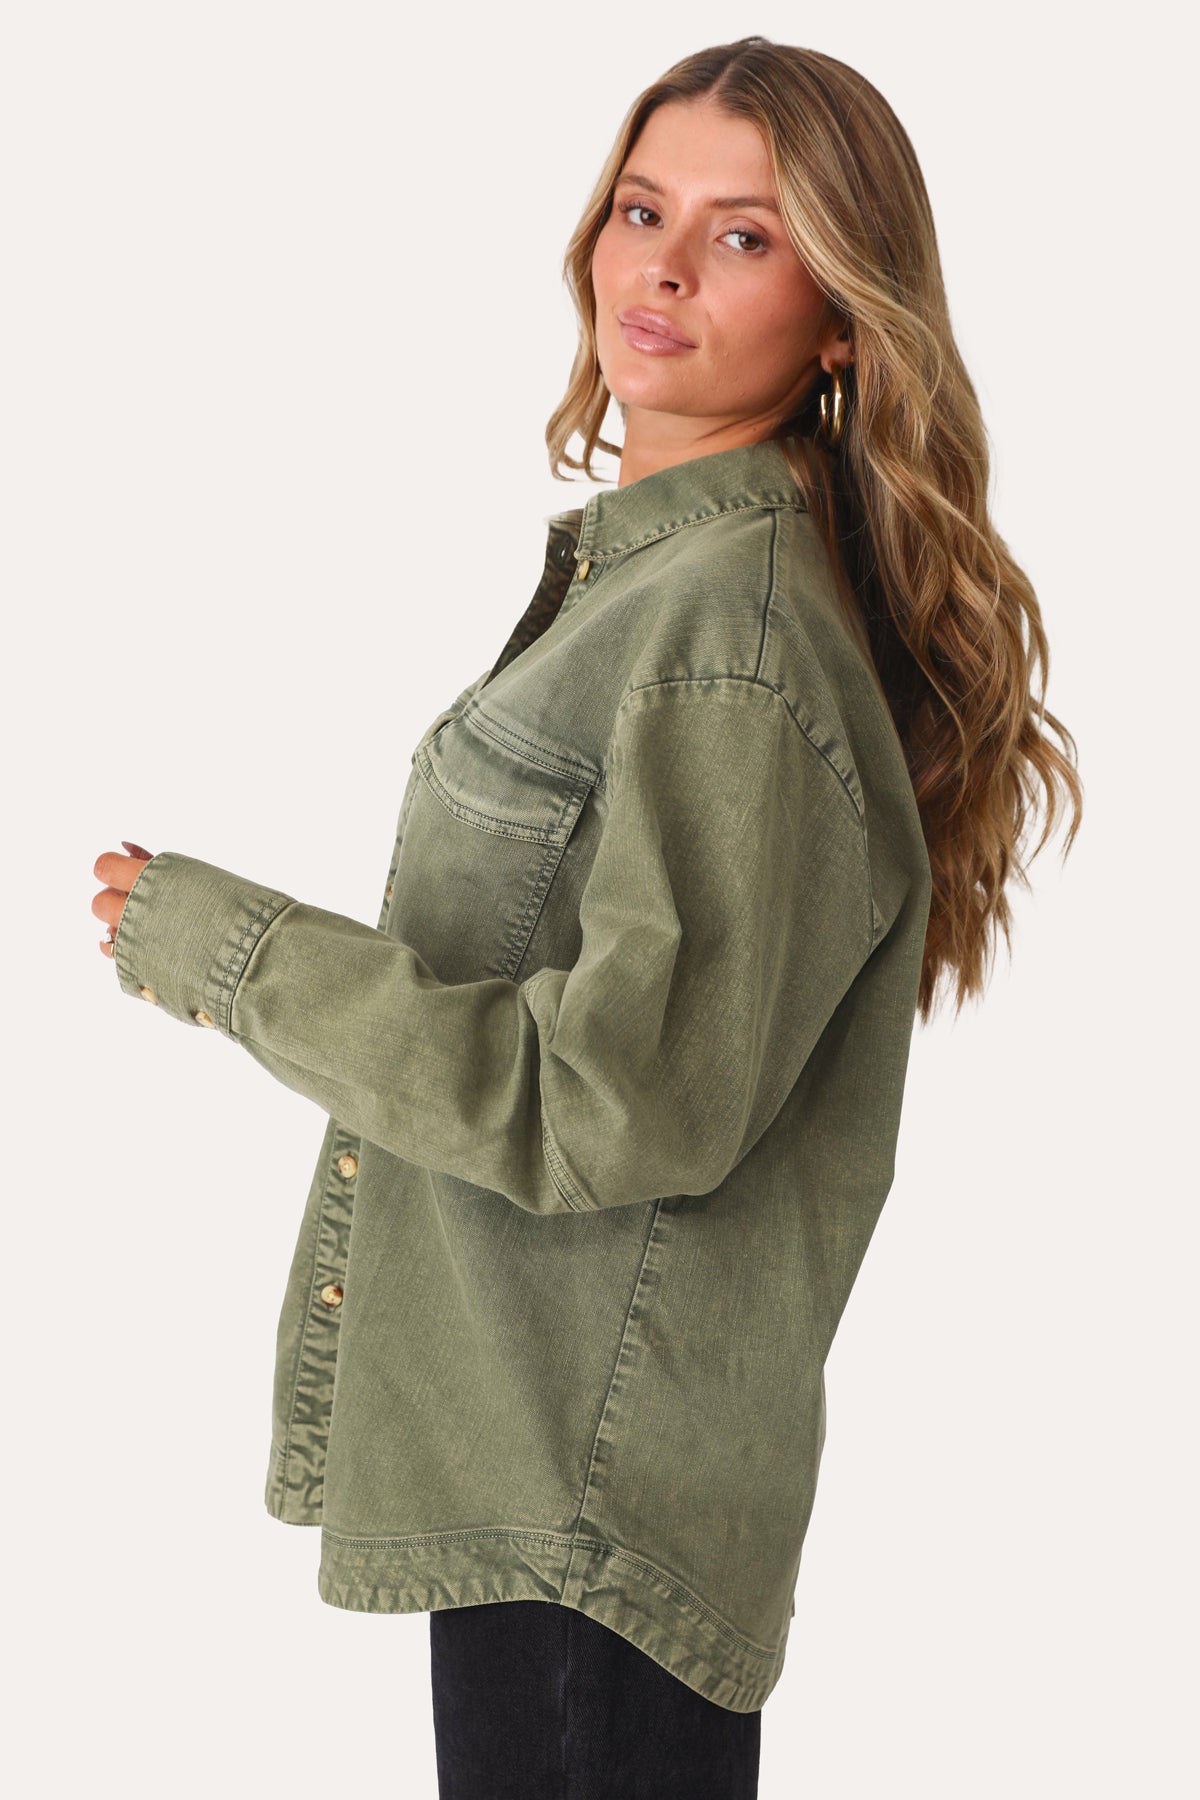 MODEL WEARING THE STEP IT UP GREEN UTILITY SHACKET